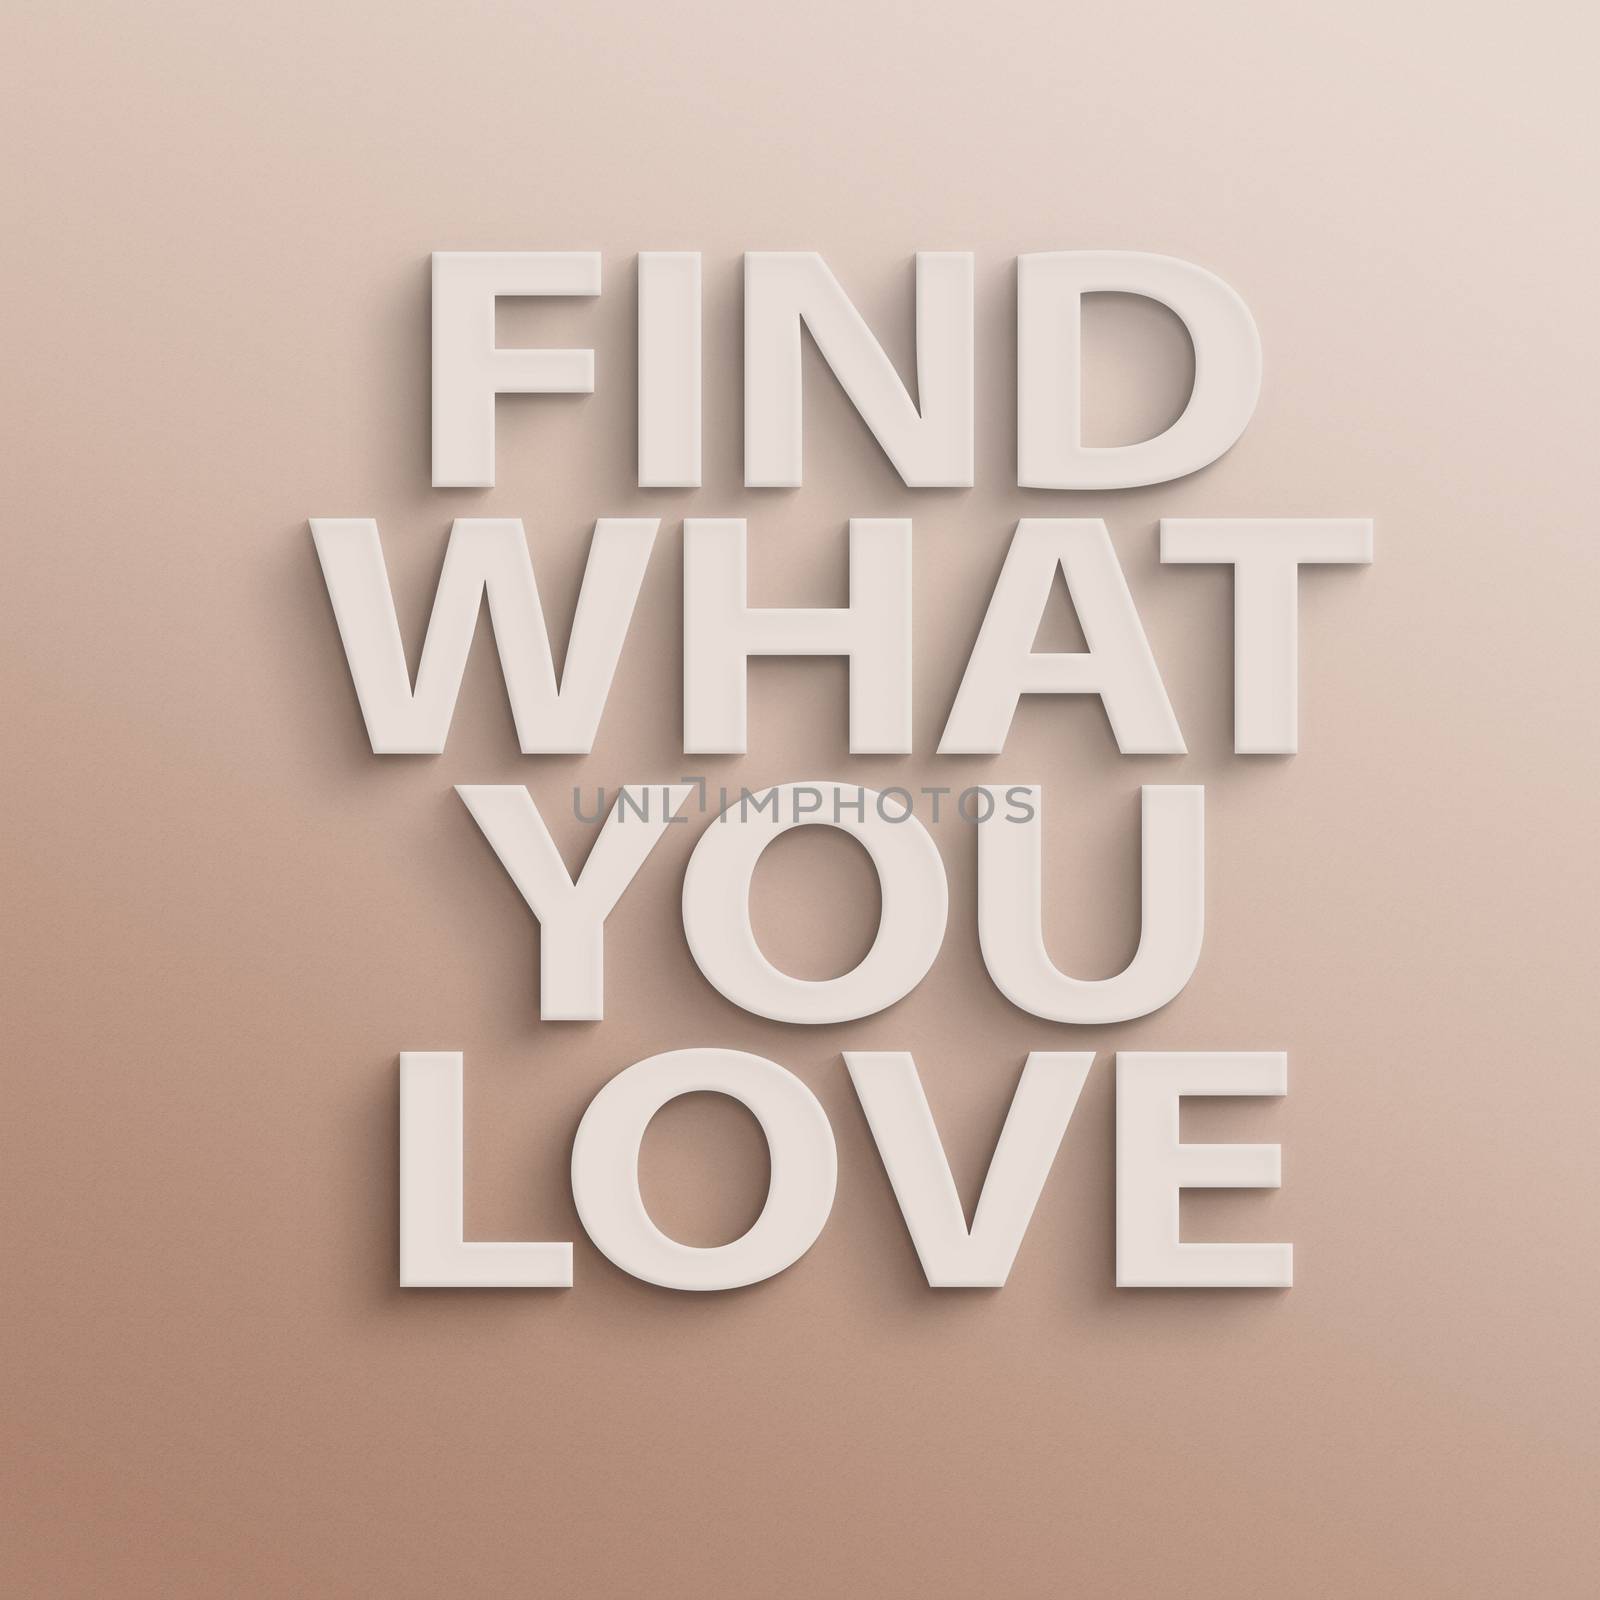 text on the wall or paper, find what you love